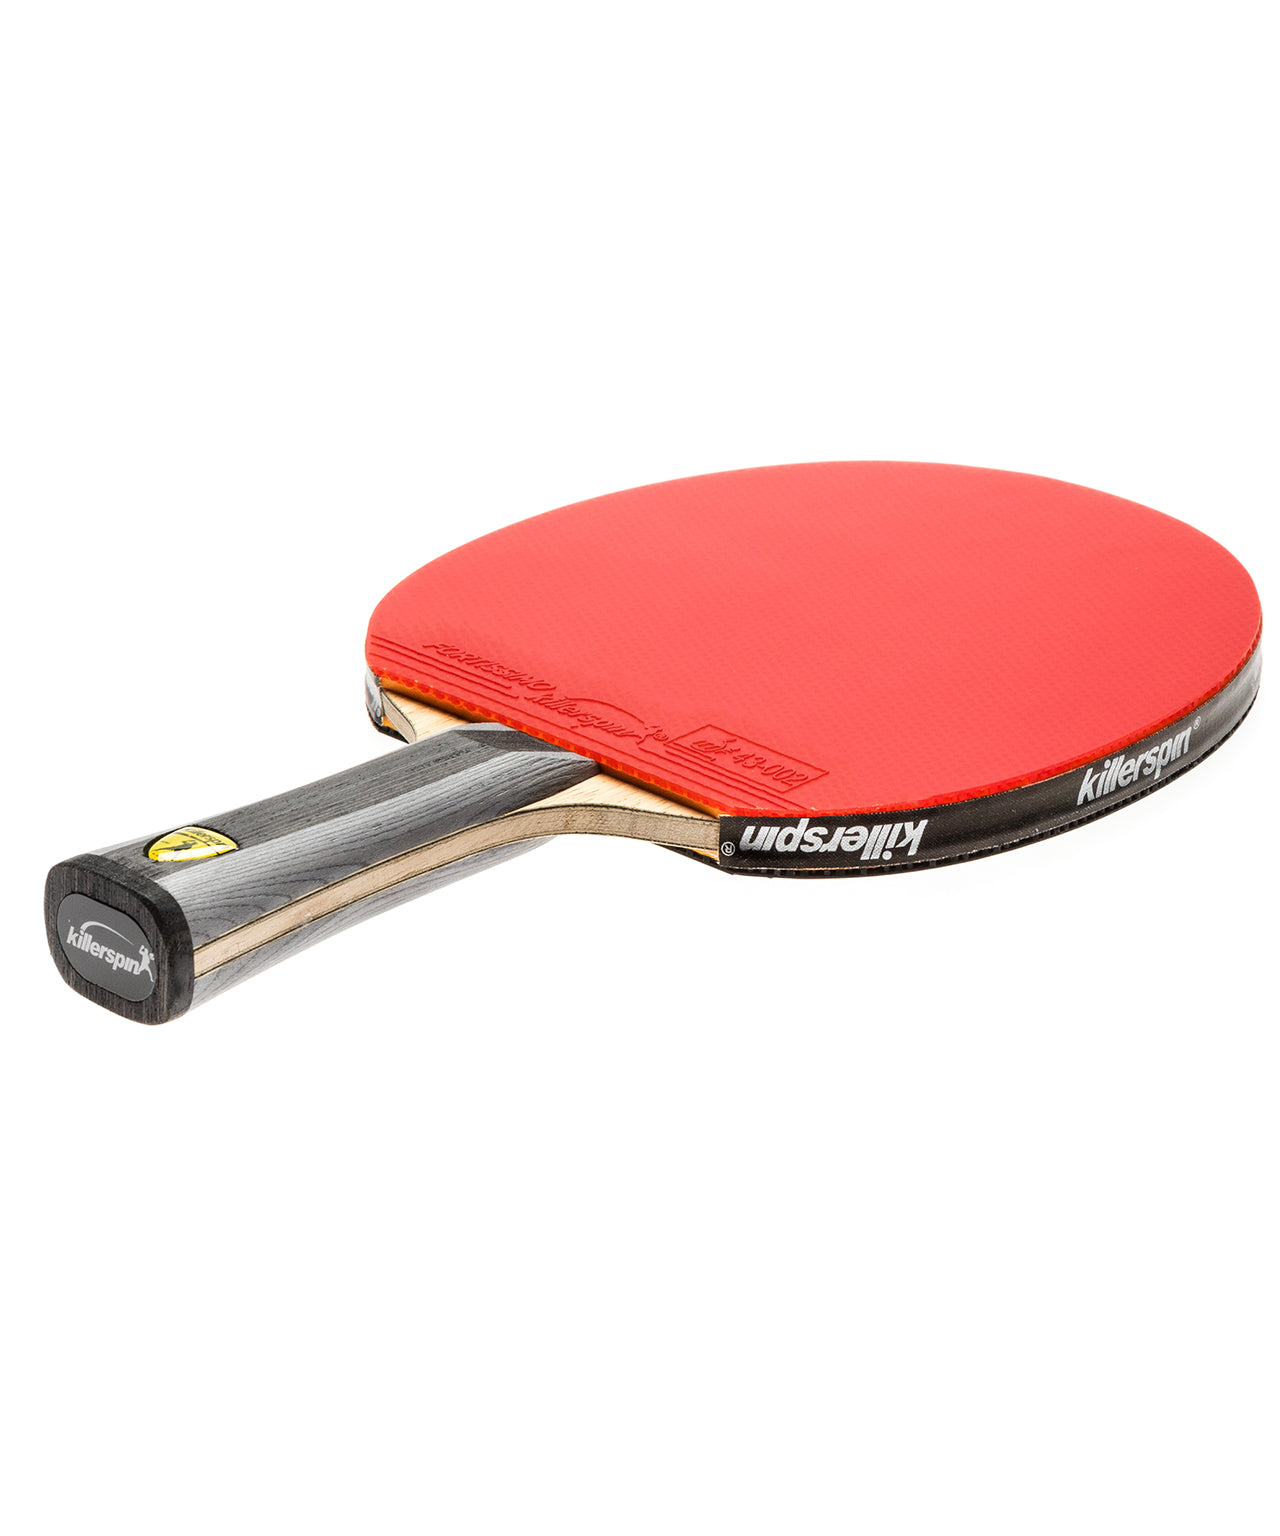 10 Most Expensive Ping Pong Paddles Ever - Rarest.org